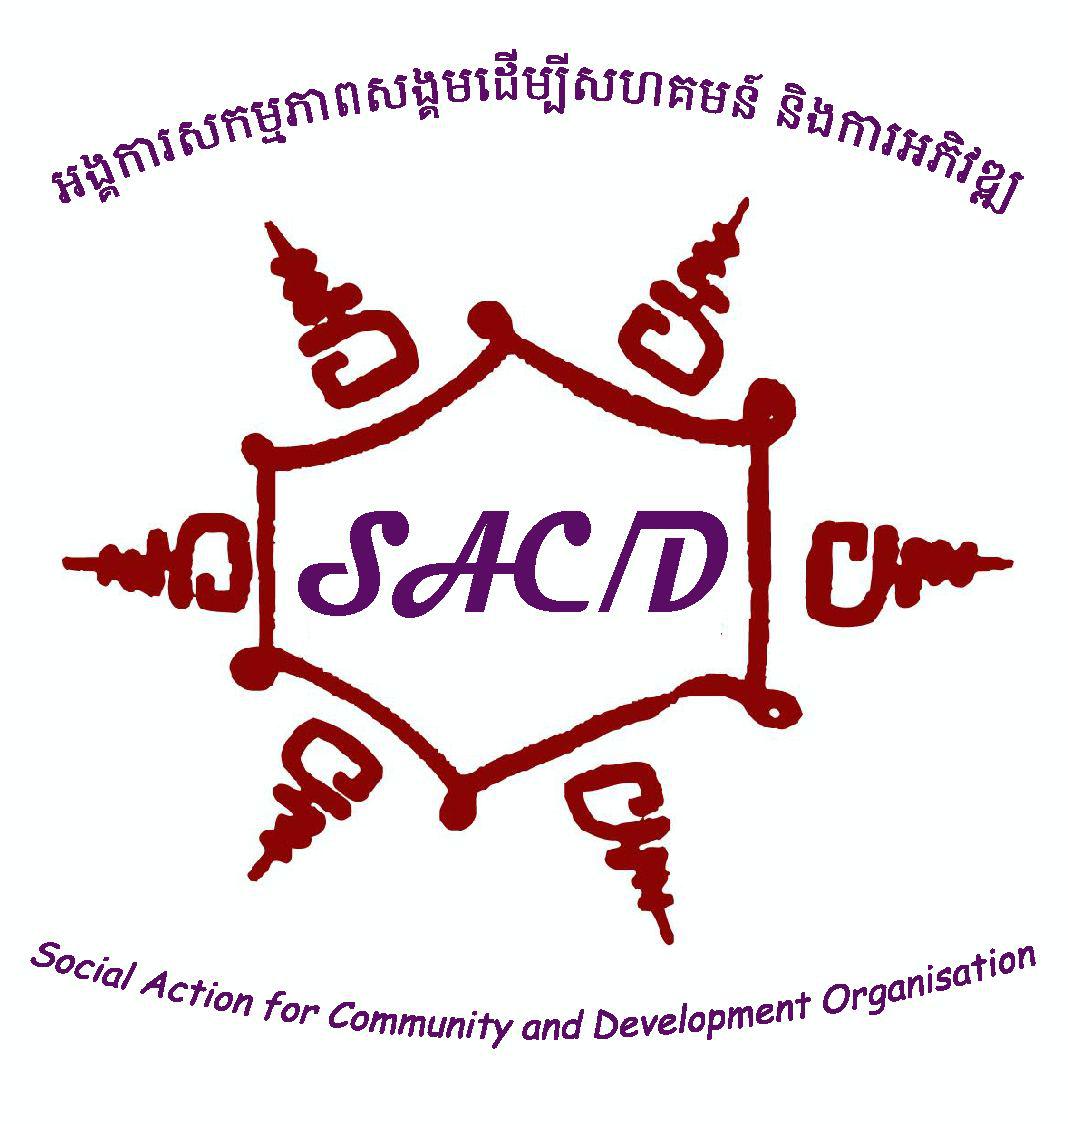 Social Action for Community and Development